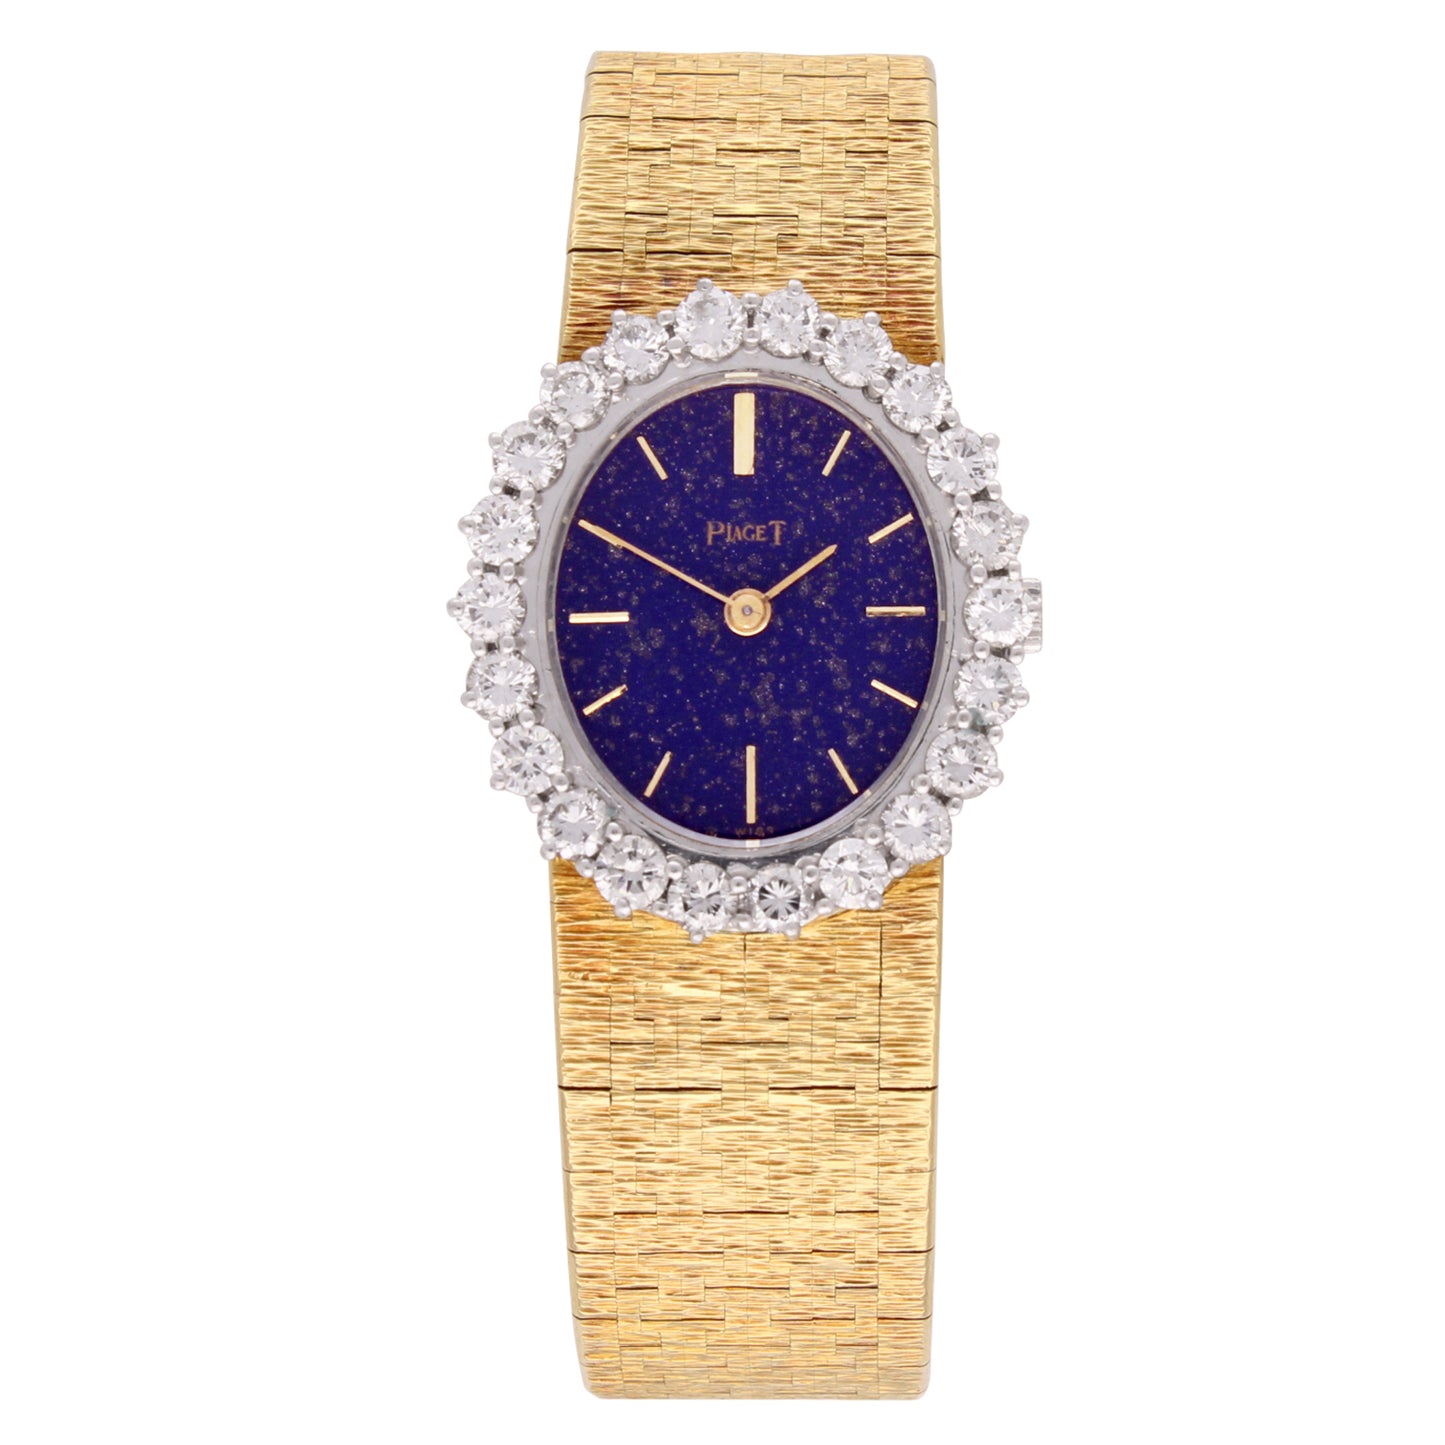 18ct yellow gold 'oval cased' bracelet watch with lapis lazuli dial and diamond set bezel. Made 1970's